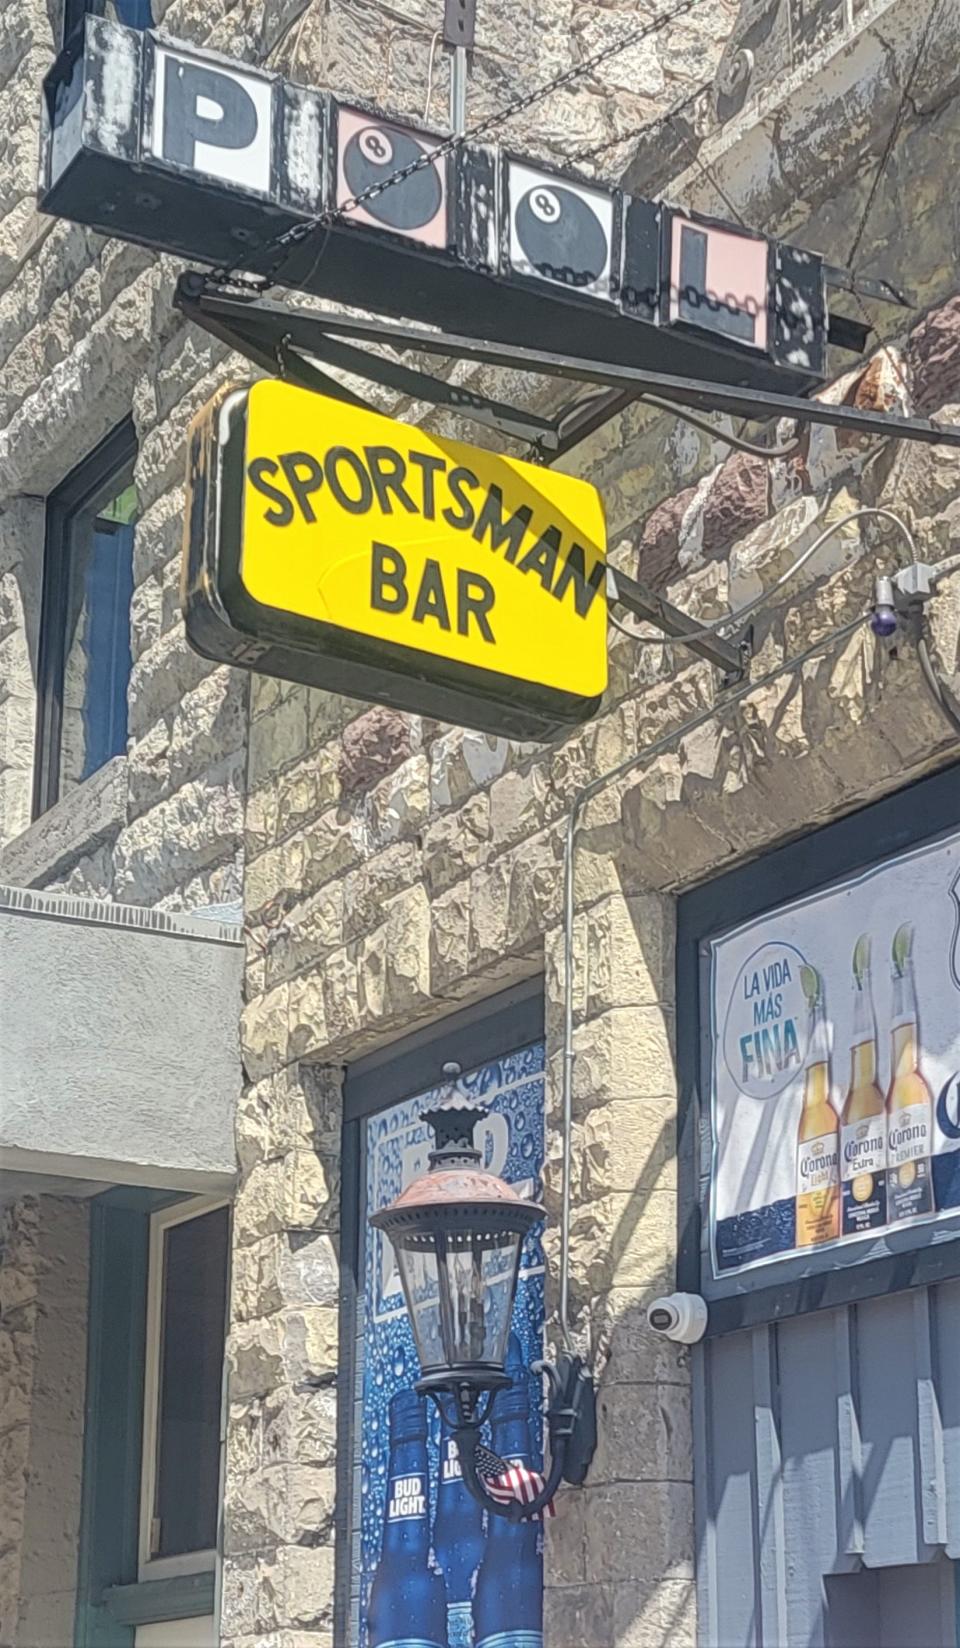 Welcome to the Sportsman's Bar in Kingman.